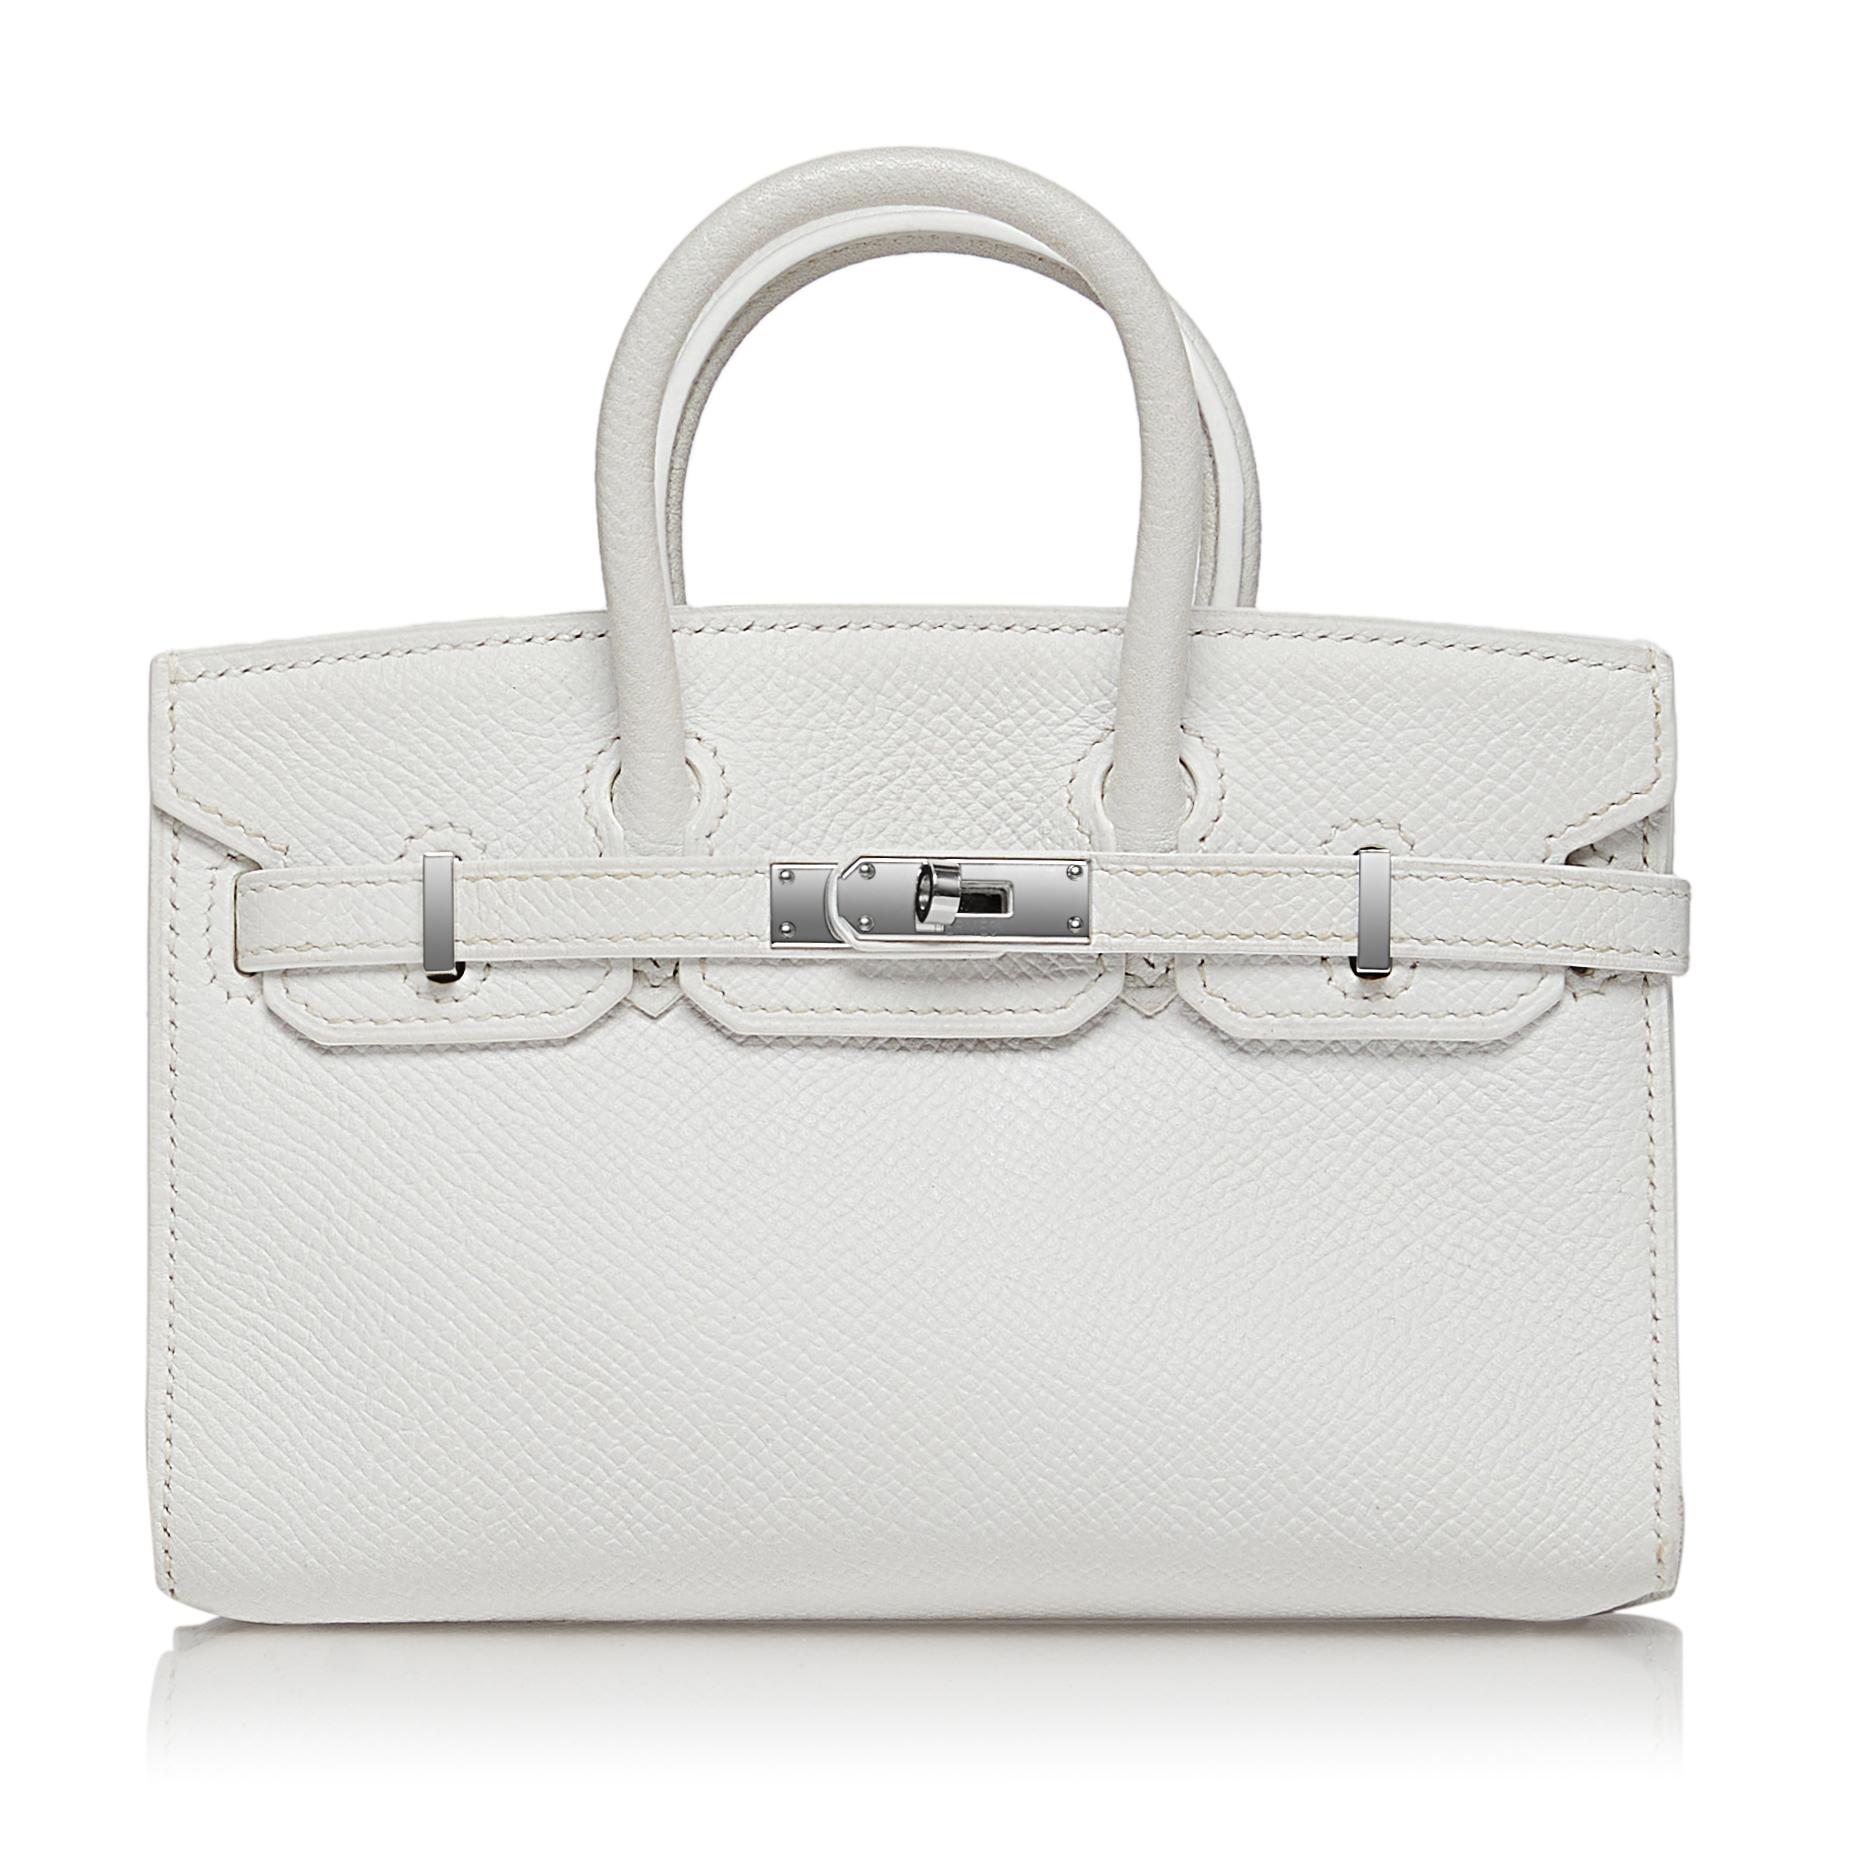 Released on the last runway of Jean Paul Gaultier for Hermes in 2011, this extremely rare Hermès White Micro Birkin Handbag comes with a strap and can be worn as a wristlet, small clutch or shoulder bag. This mini Birkin might be very small but its